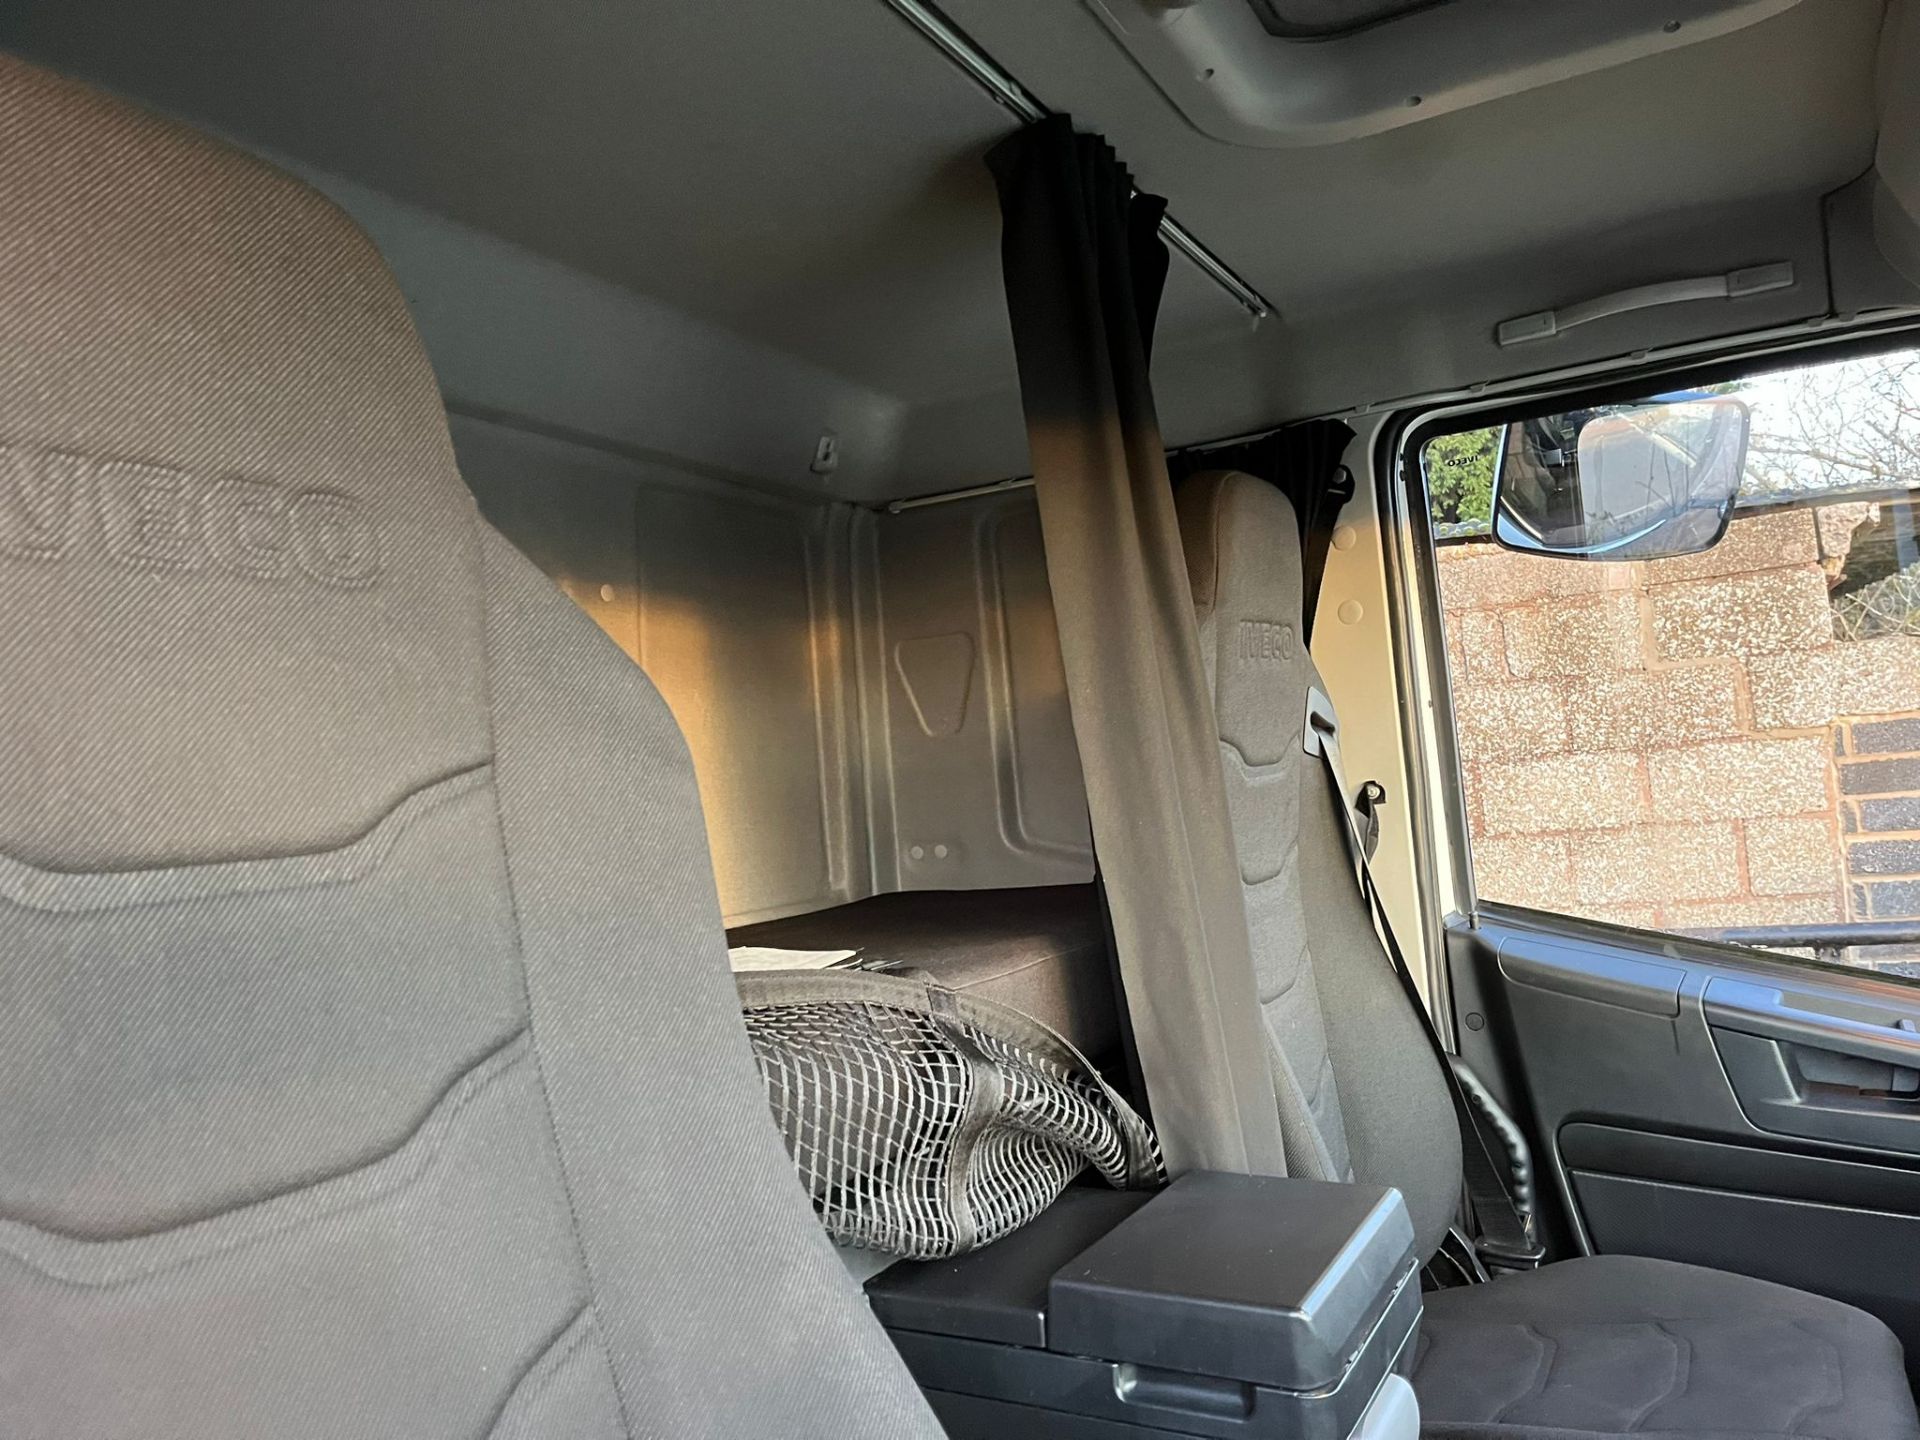 SPACIOUS SLEEPER CAB: 2019 IVECO EUROCARGO FOR HAULING - Image 7 of 21